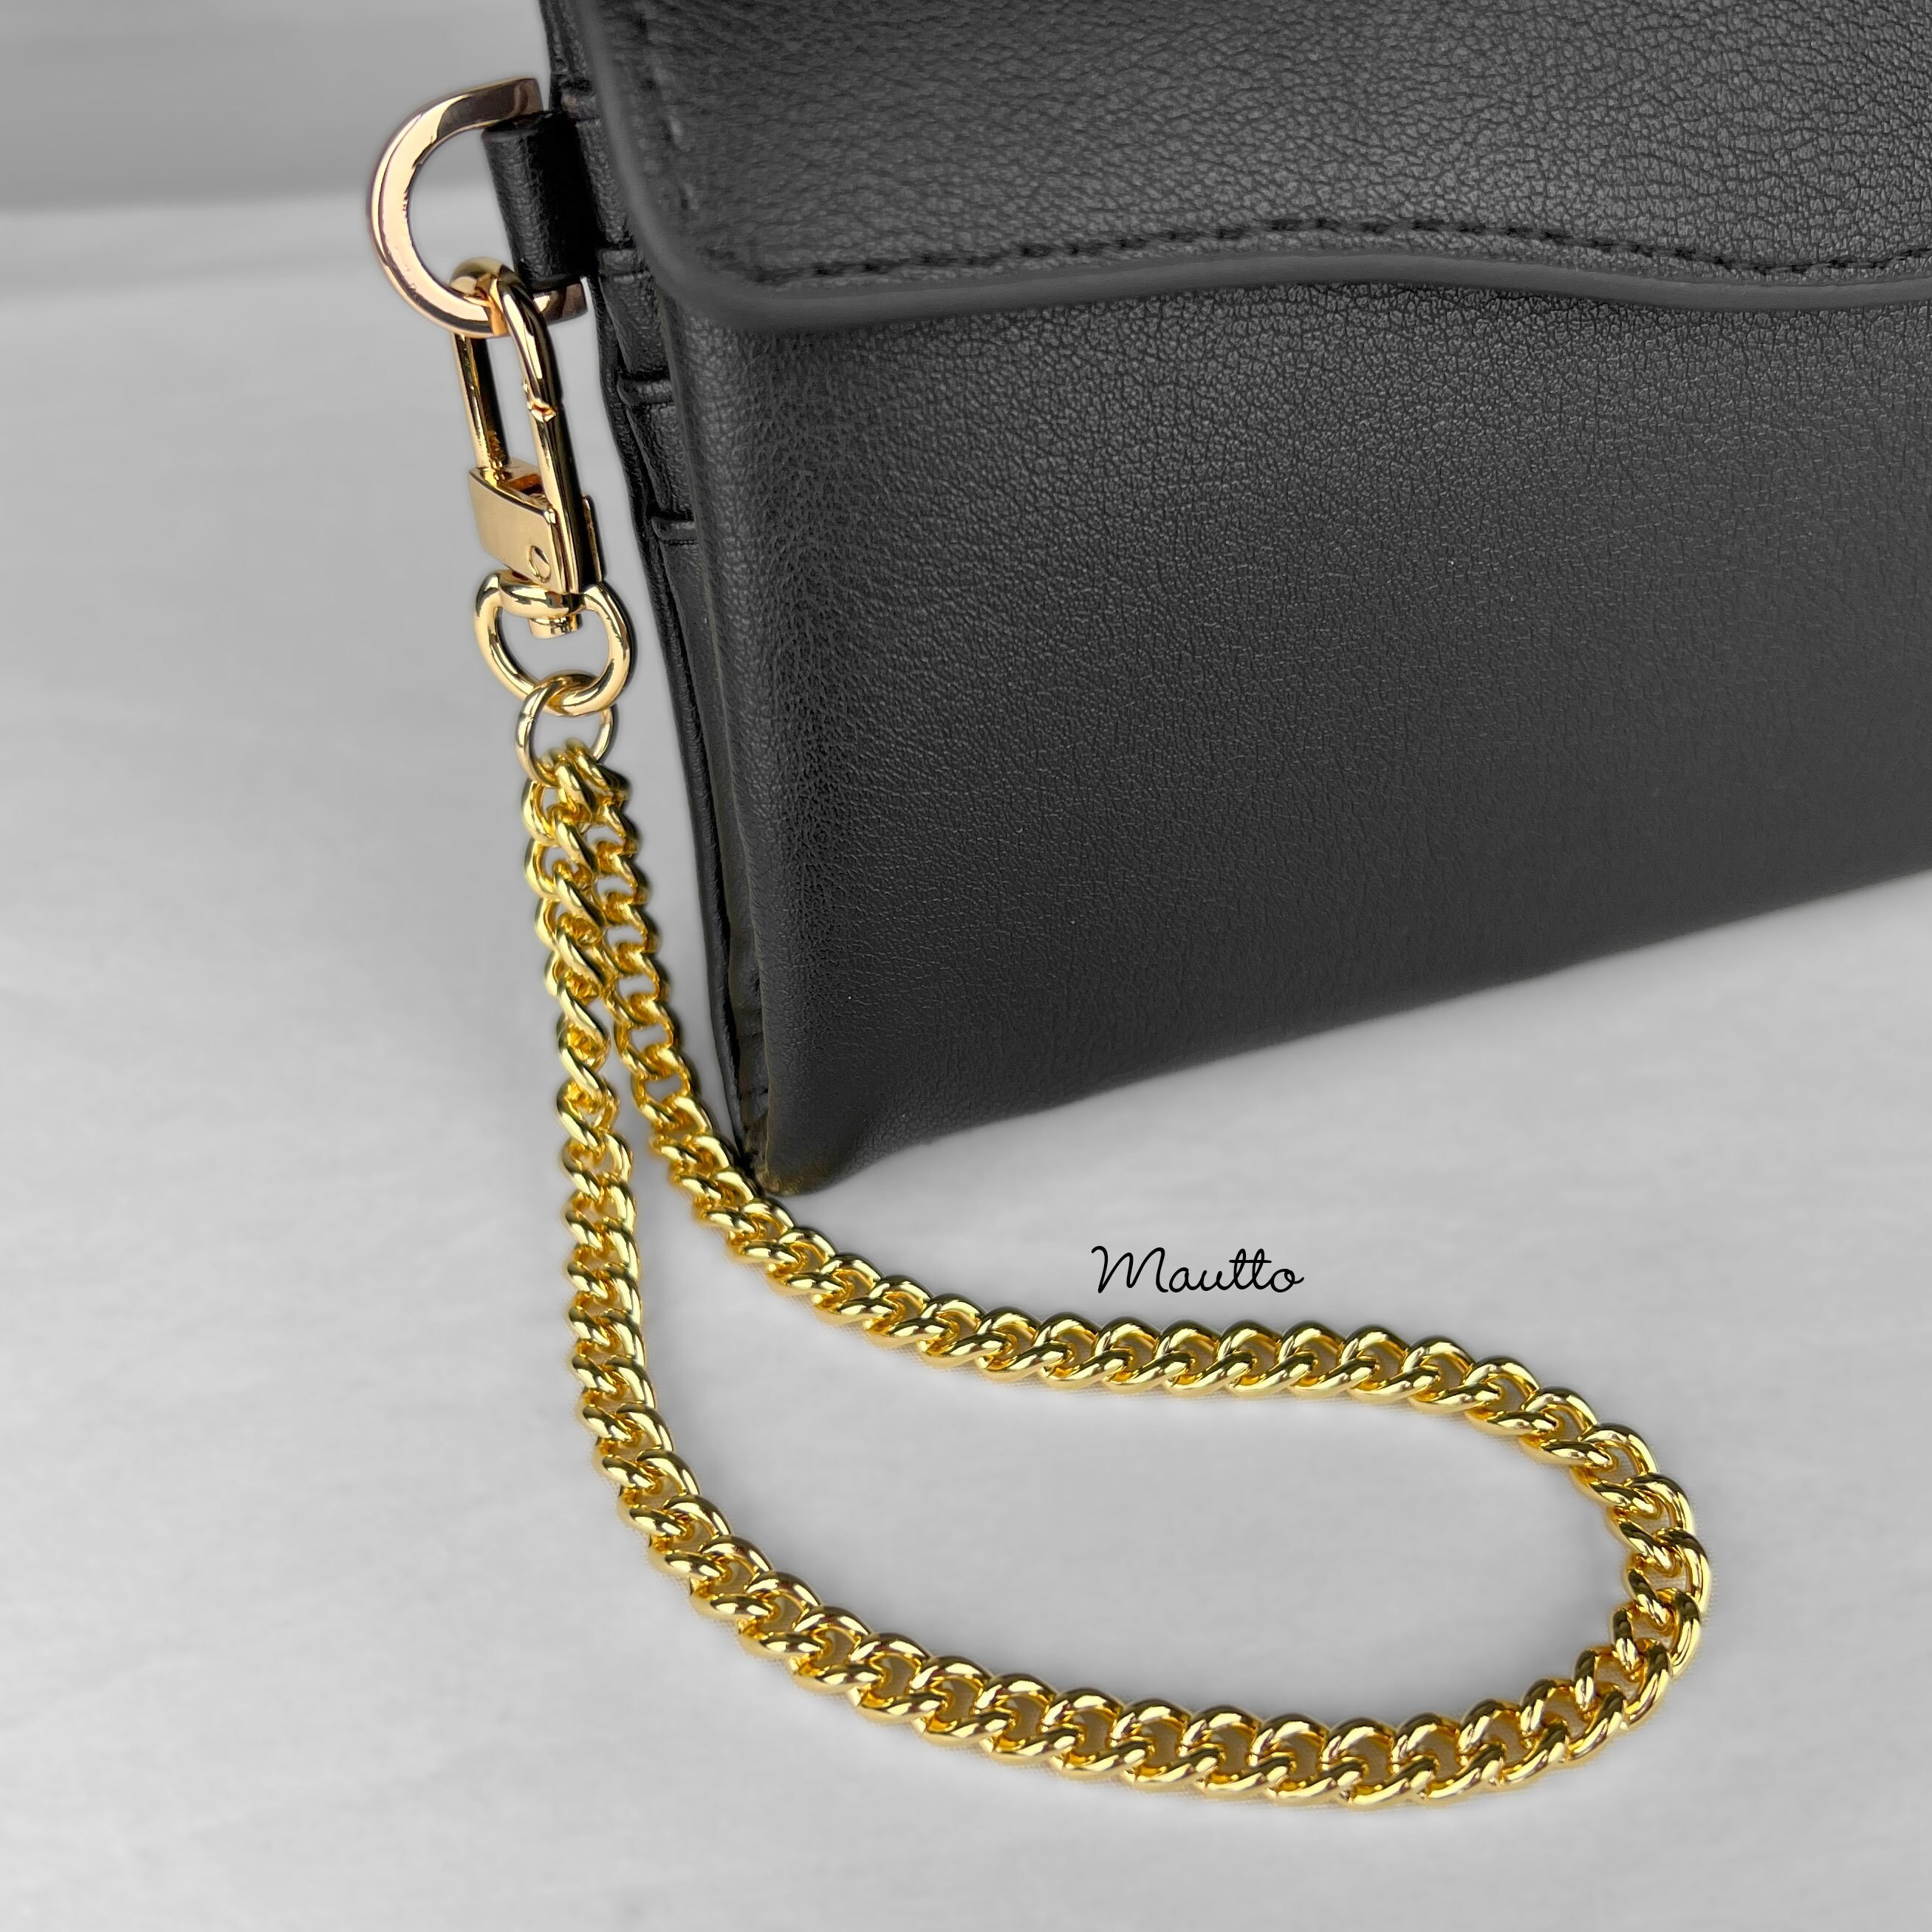 20mm Wide High Quality Gold Purse Strap Chain, Aluminum Links